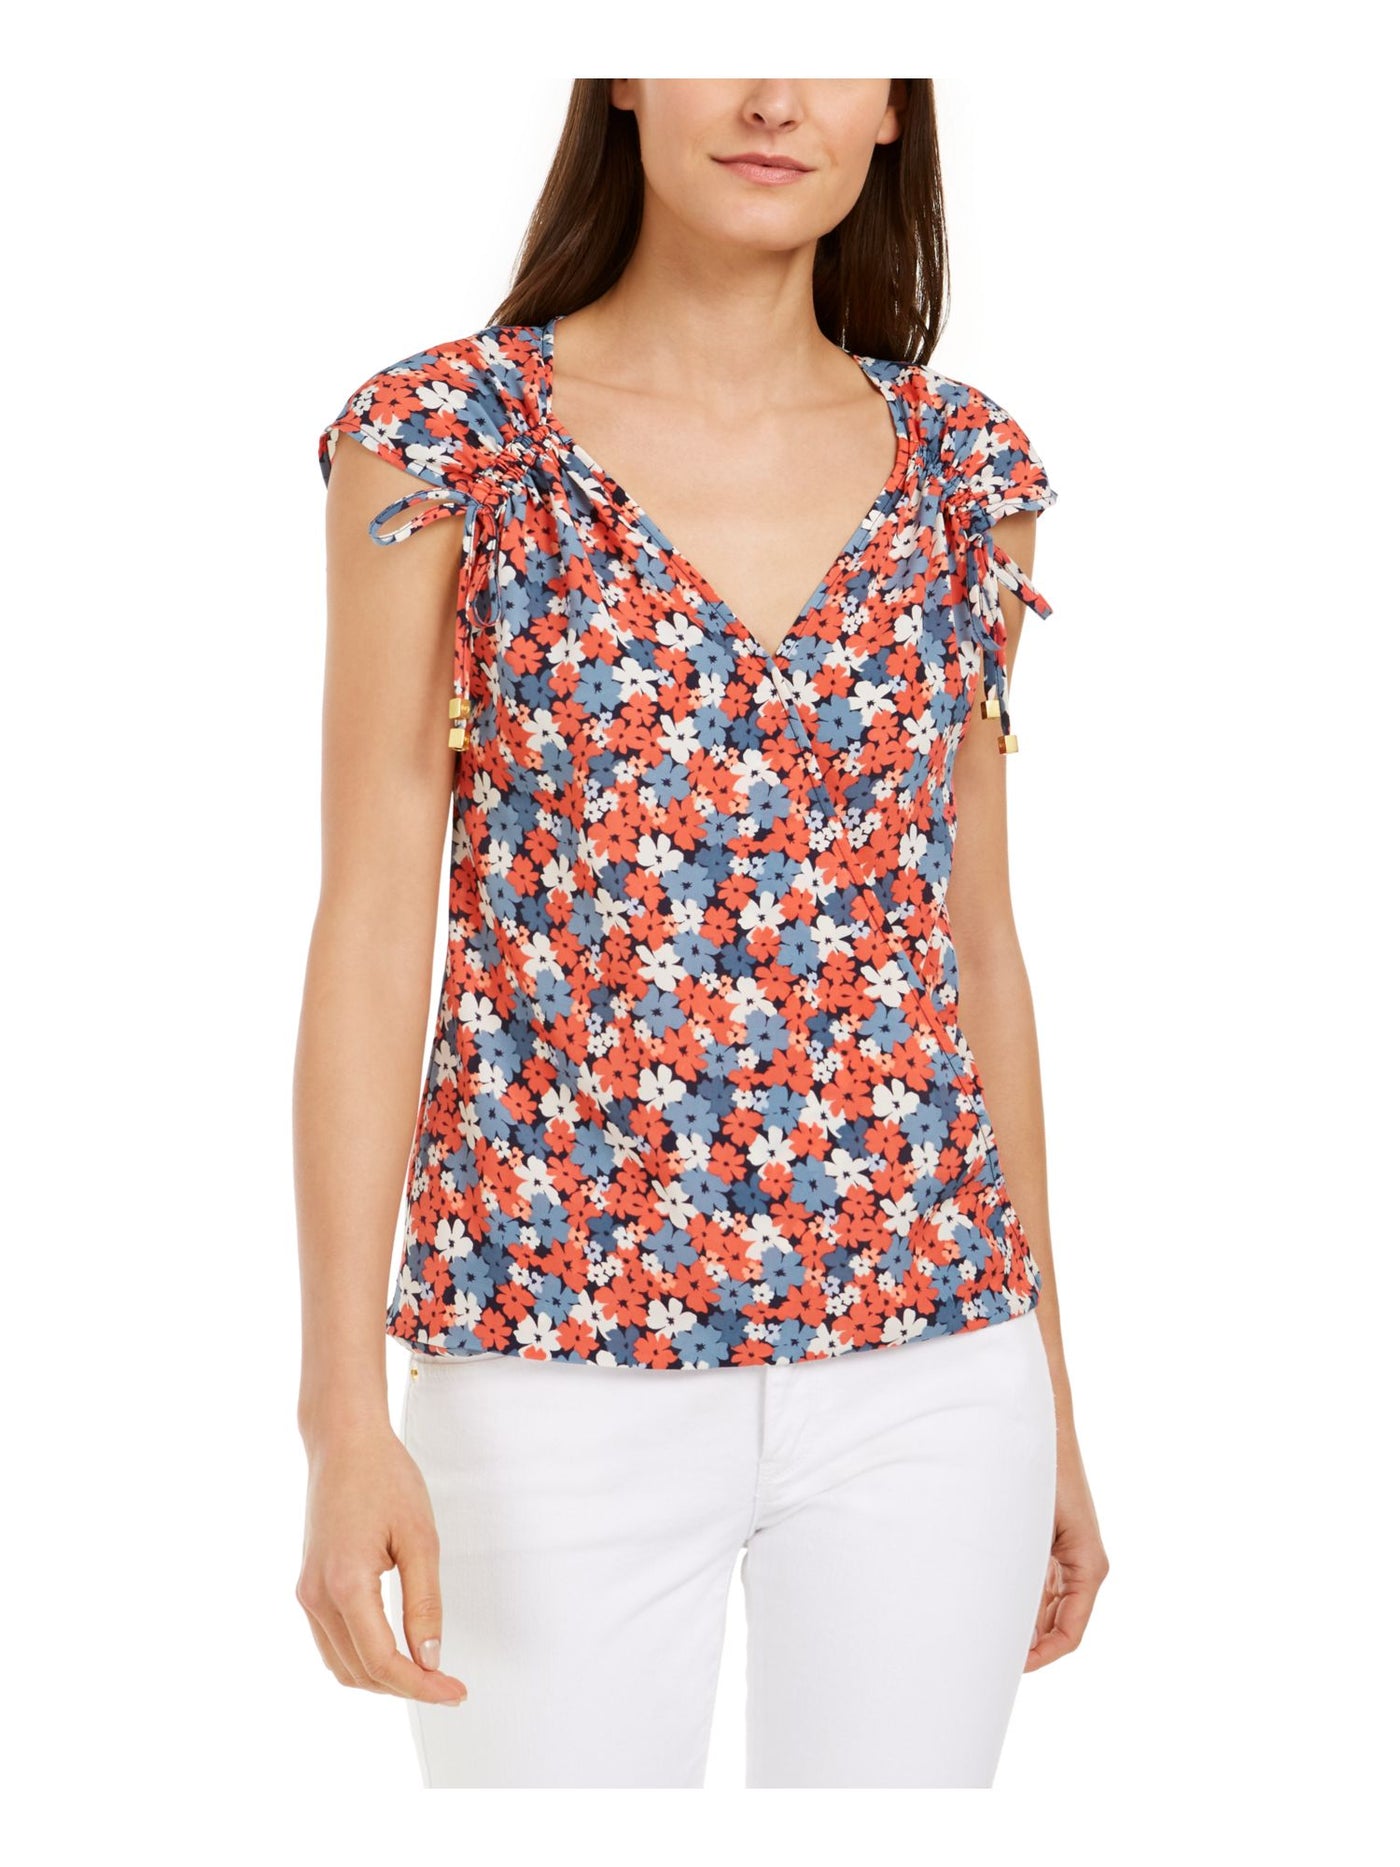 MICHAEL KORS Womens Coral Floral Sleeveless V Neck Top S